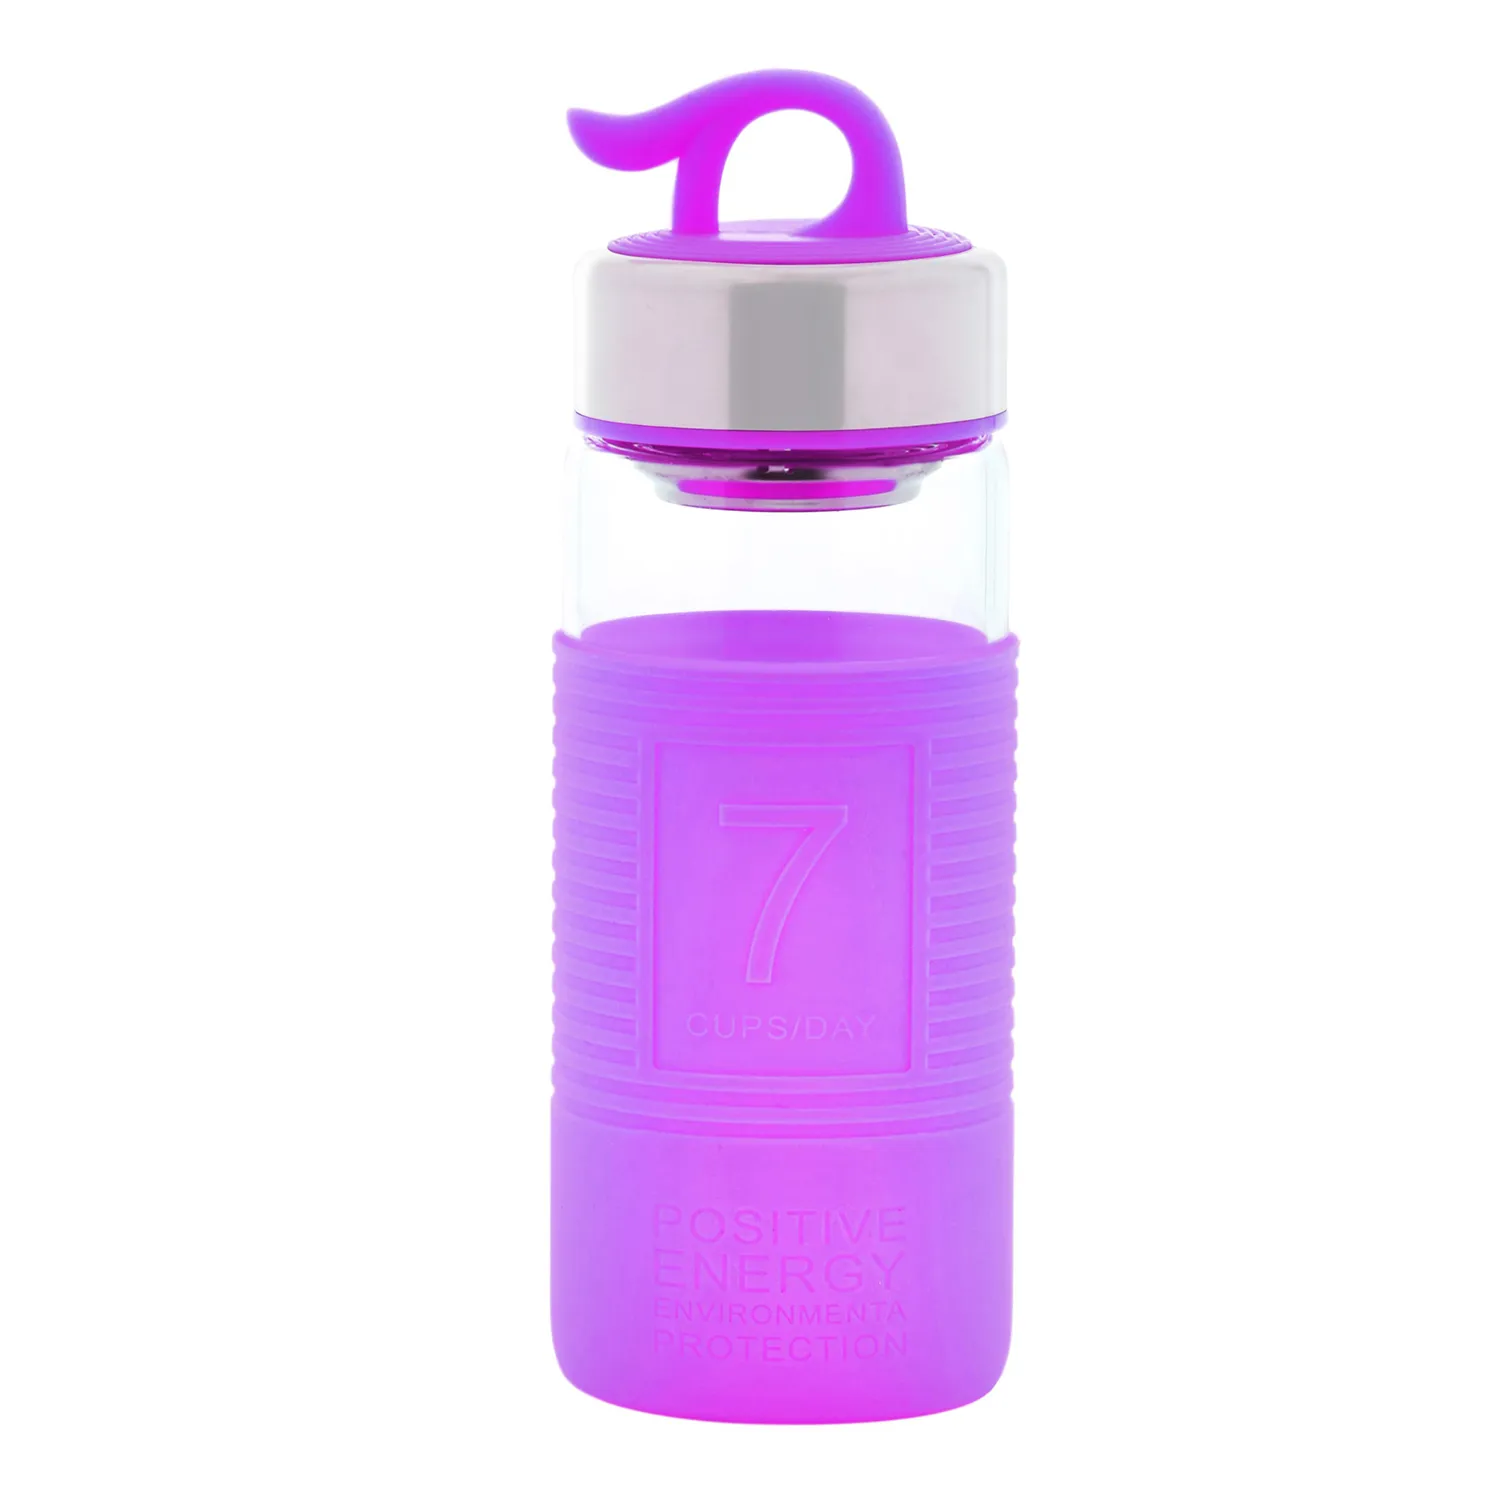 Royalford Silicon Sleeve Glass Bottle | 400ml | BPA & PVC Free |RF8307 | Dishwasher Safe | Durable & Spill Proof